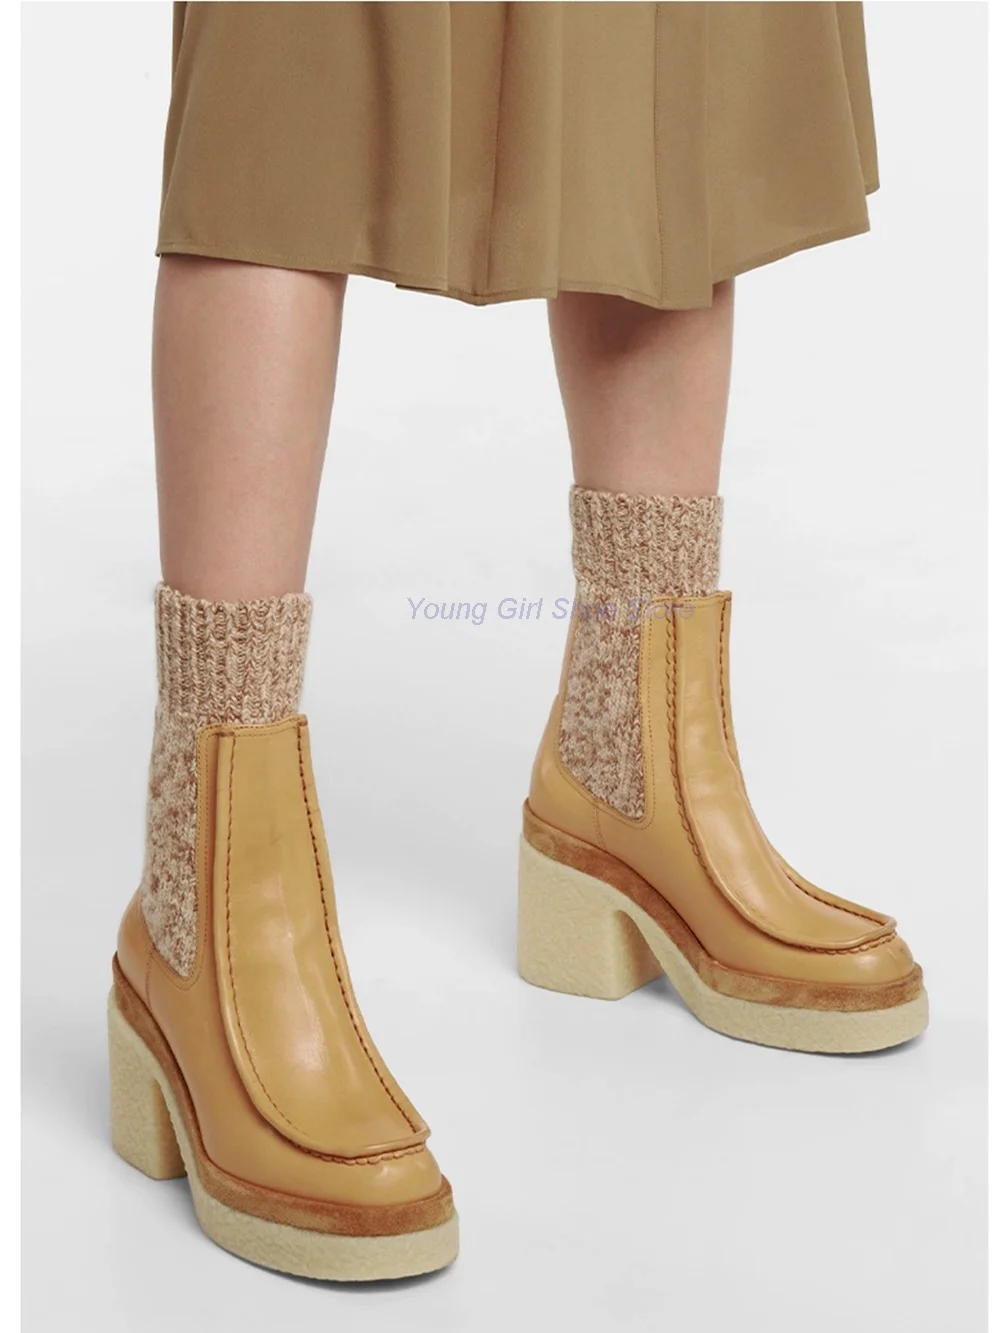 

Platform Knit Sock Boots Splicing Caramel Women Shoes Real Leather Ladies Chunky Block Heels Winter Soft Mixed Color Slip On